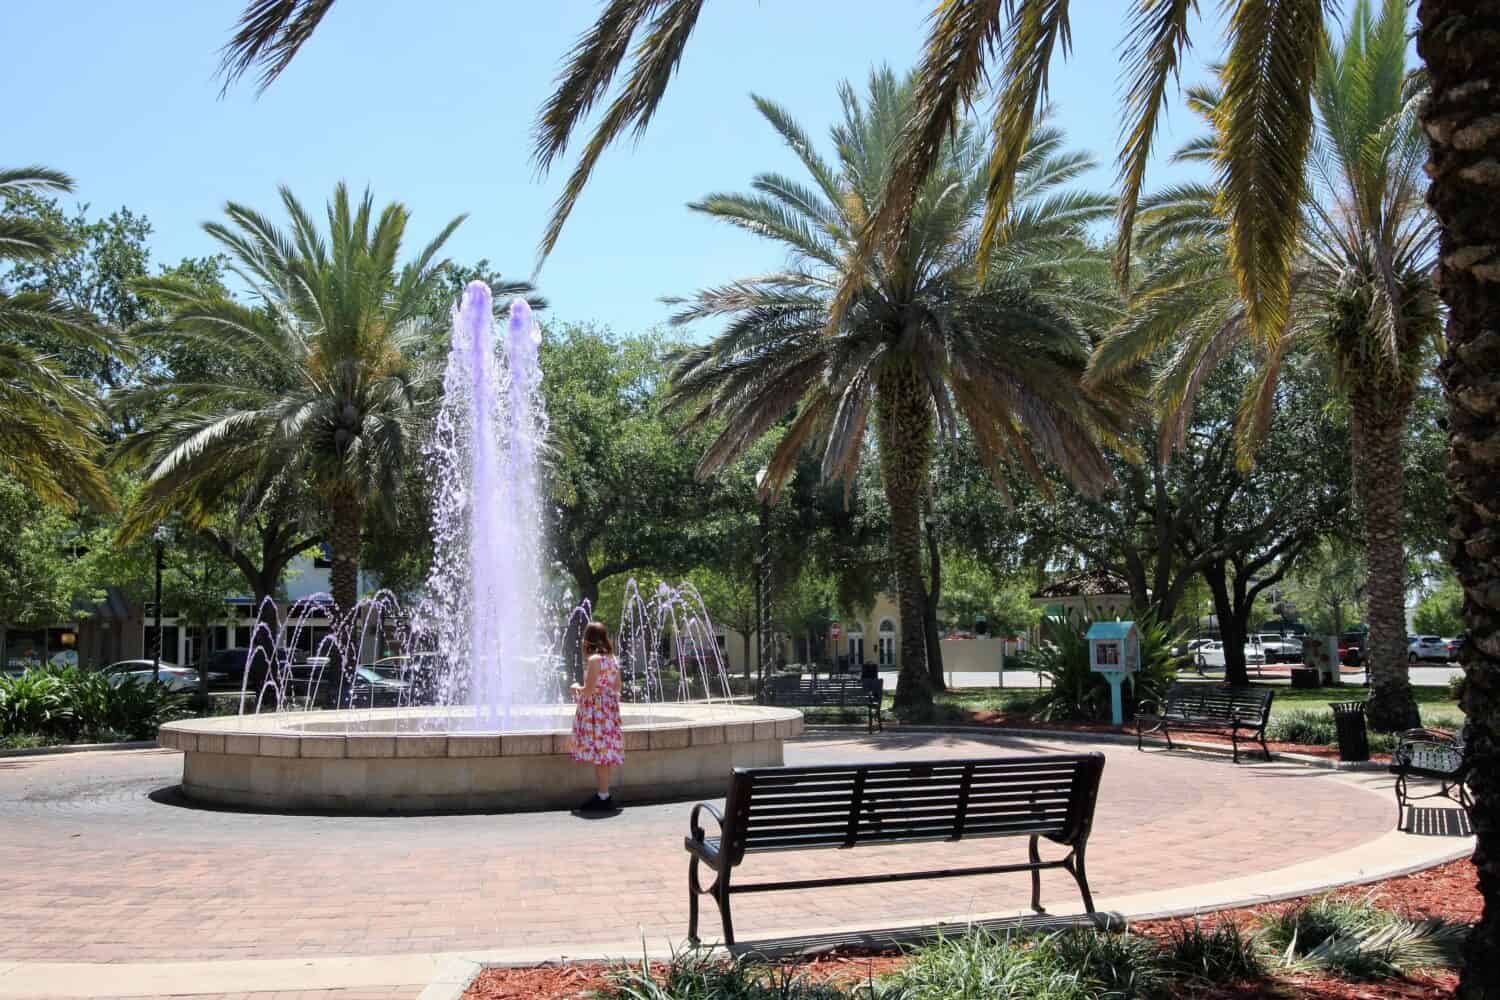 Town square in Winter Haven, Florida